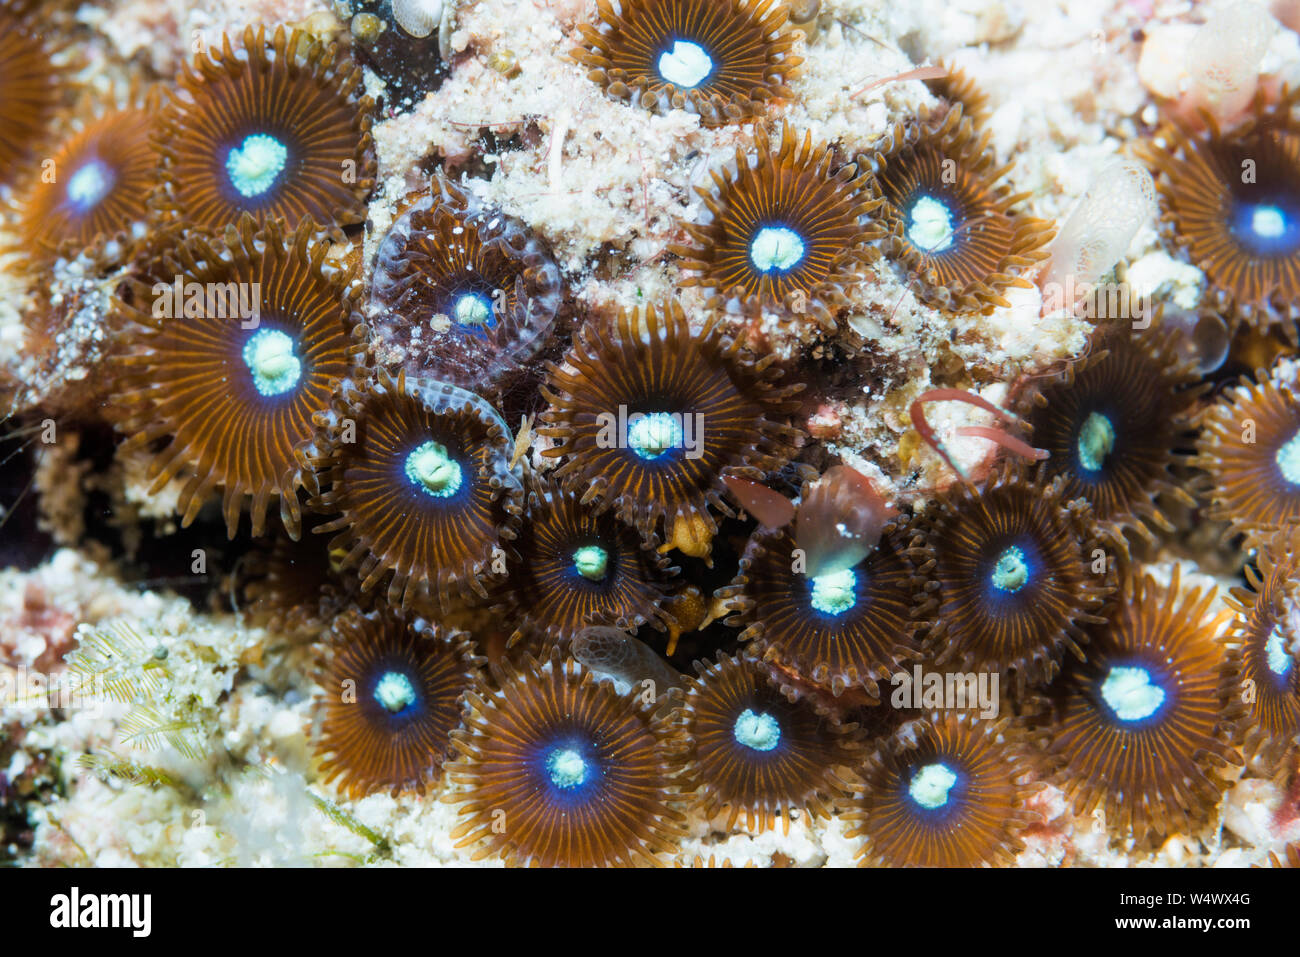 Zoanthids, colonial anemones - Protopalythoa species.  West Papua, Indonesia.  Indo-West Pacific. Stock Photo